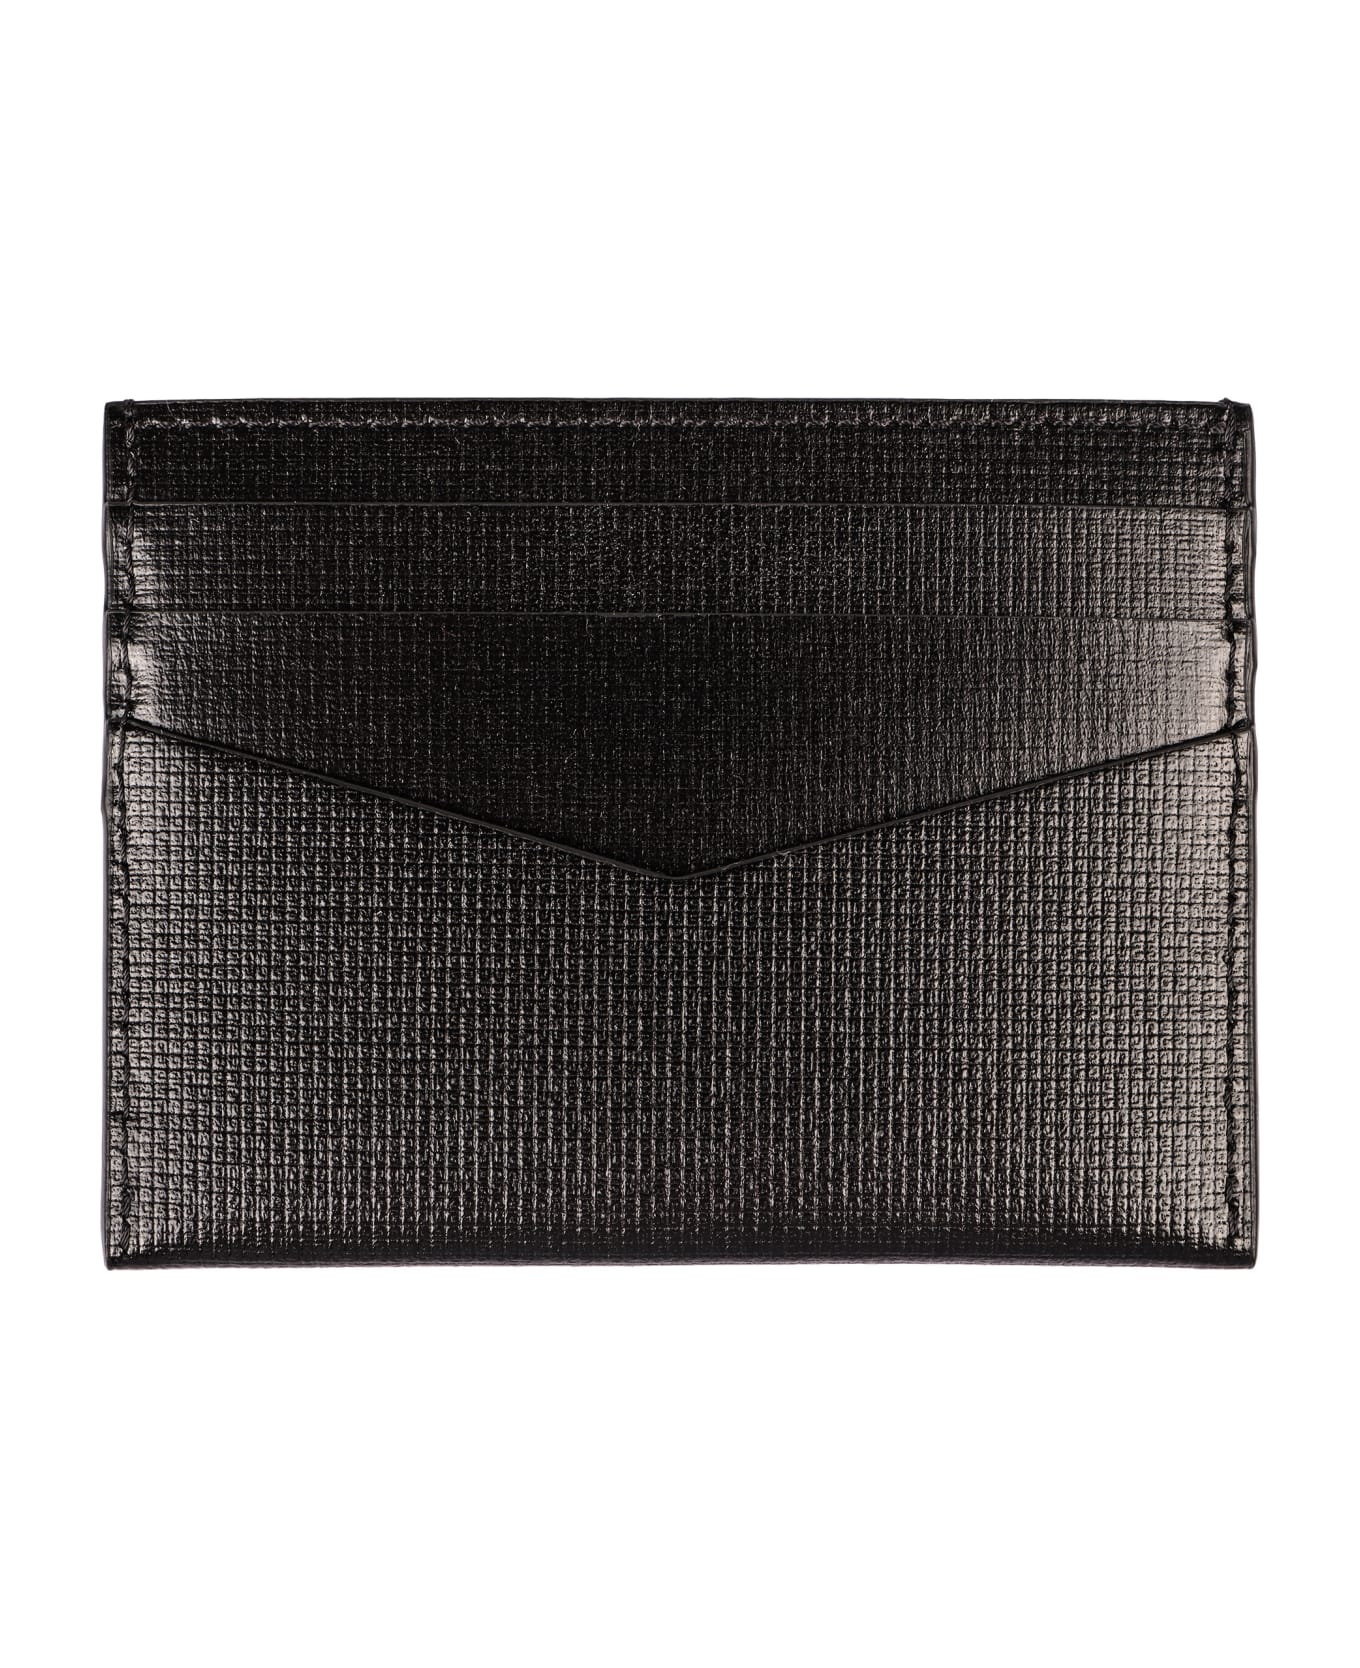 Givenchy Classique 4g Leather Card Holder - black 財布